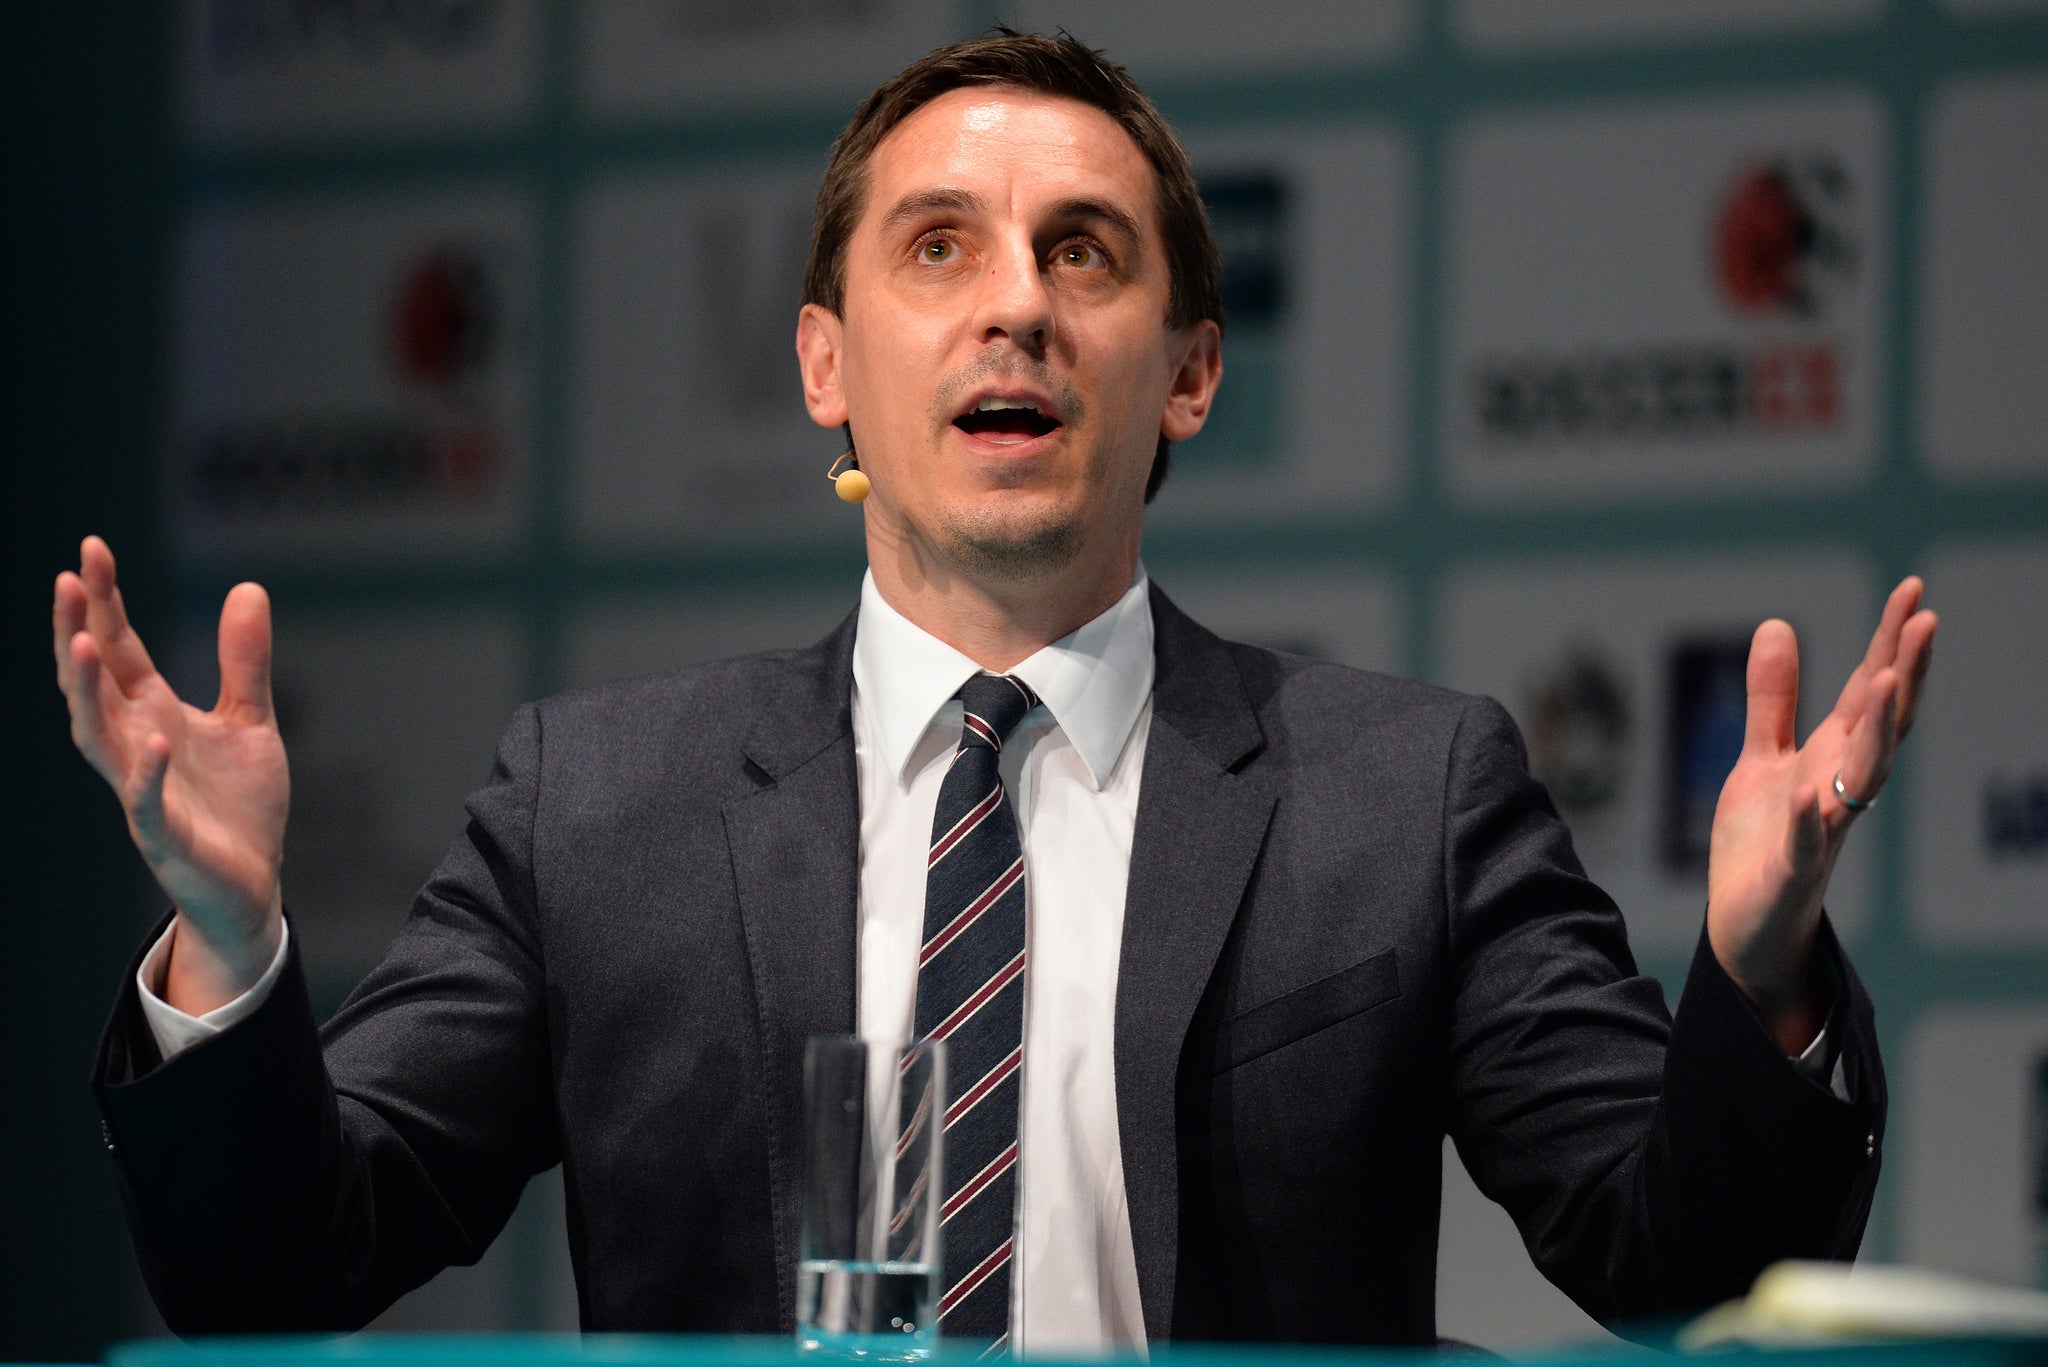 Neville has made a name for himself as a Sky Sports analyst